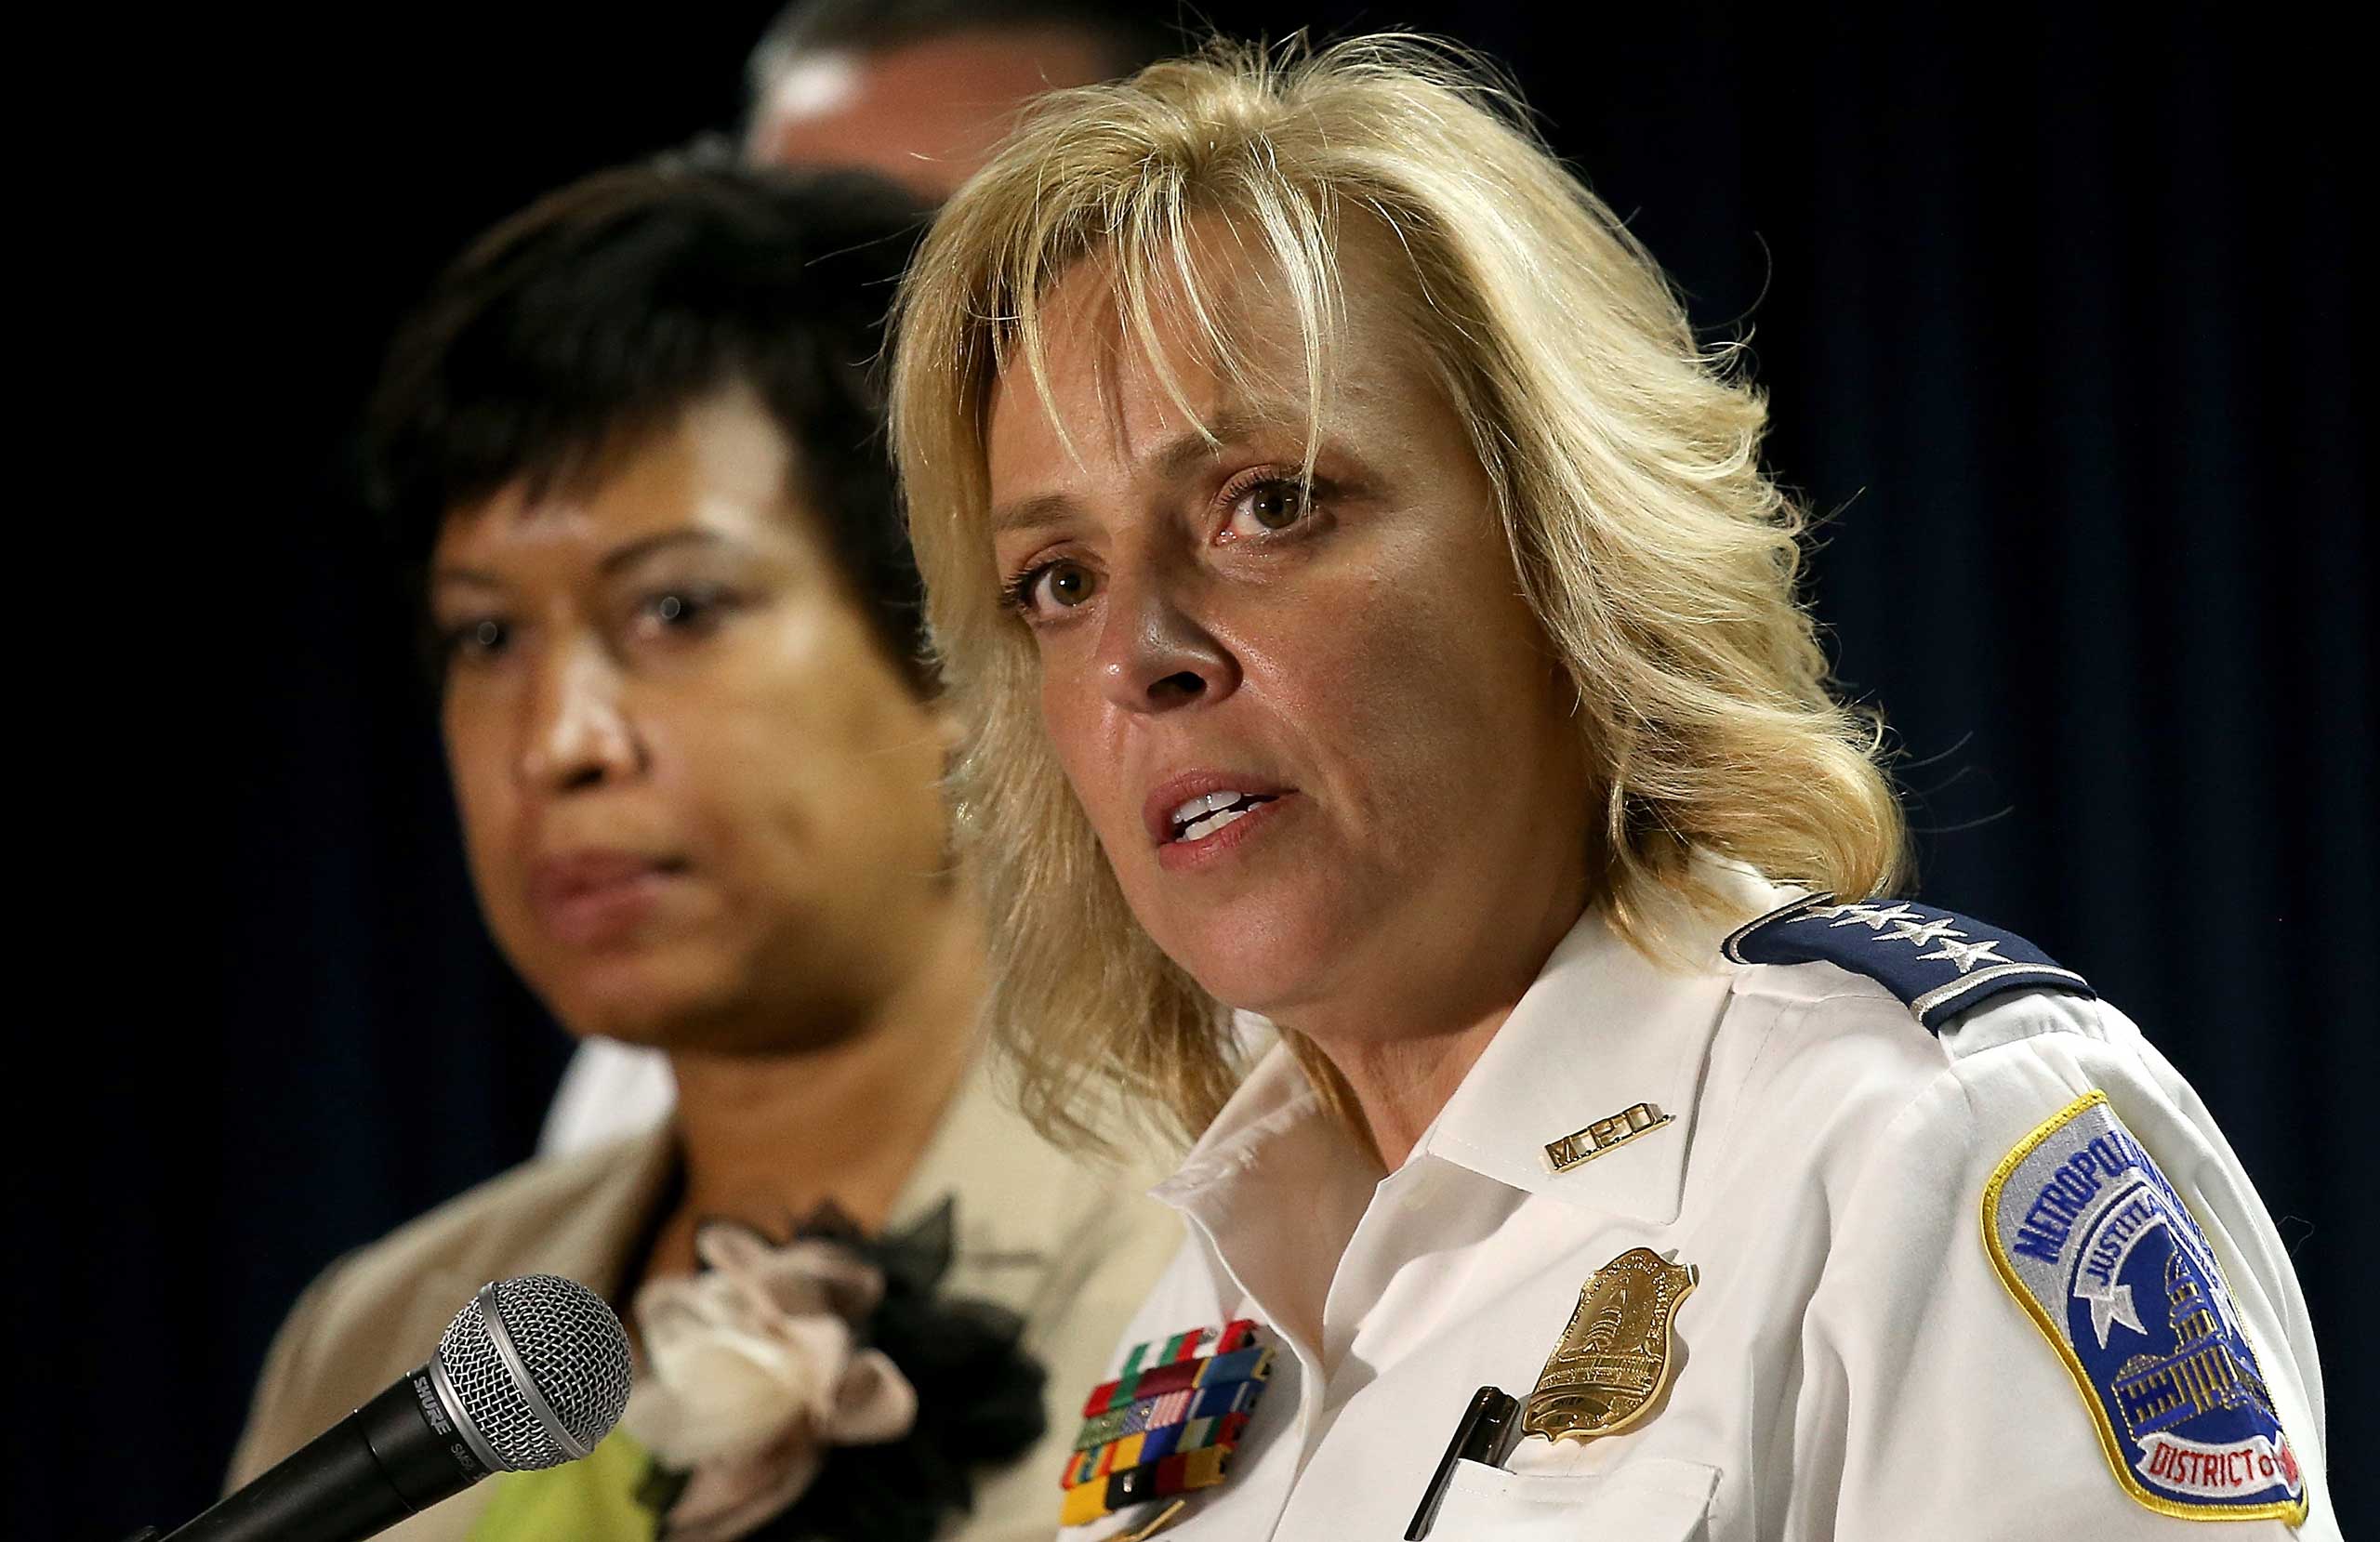 Chief of the Metropolitan Police Department Cathy Lanier speaks at a press conference at police headquarters in Washington, DC., May 21, 2015 (Win McNamee—Getty Images)